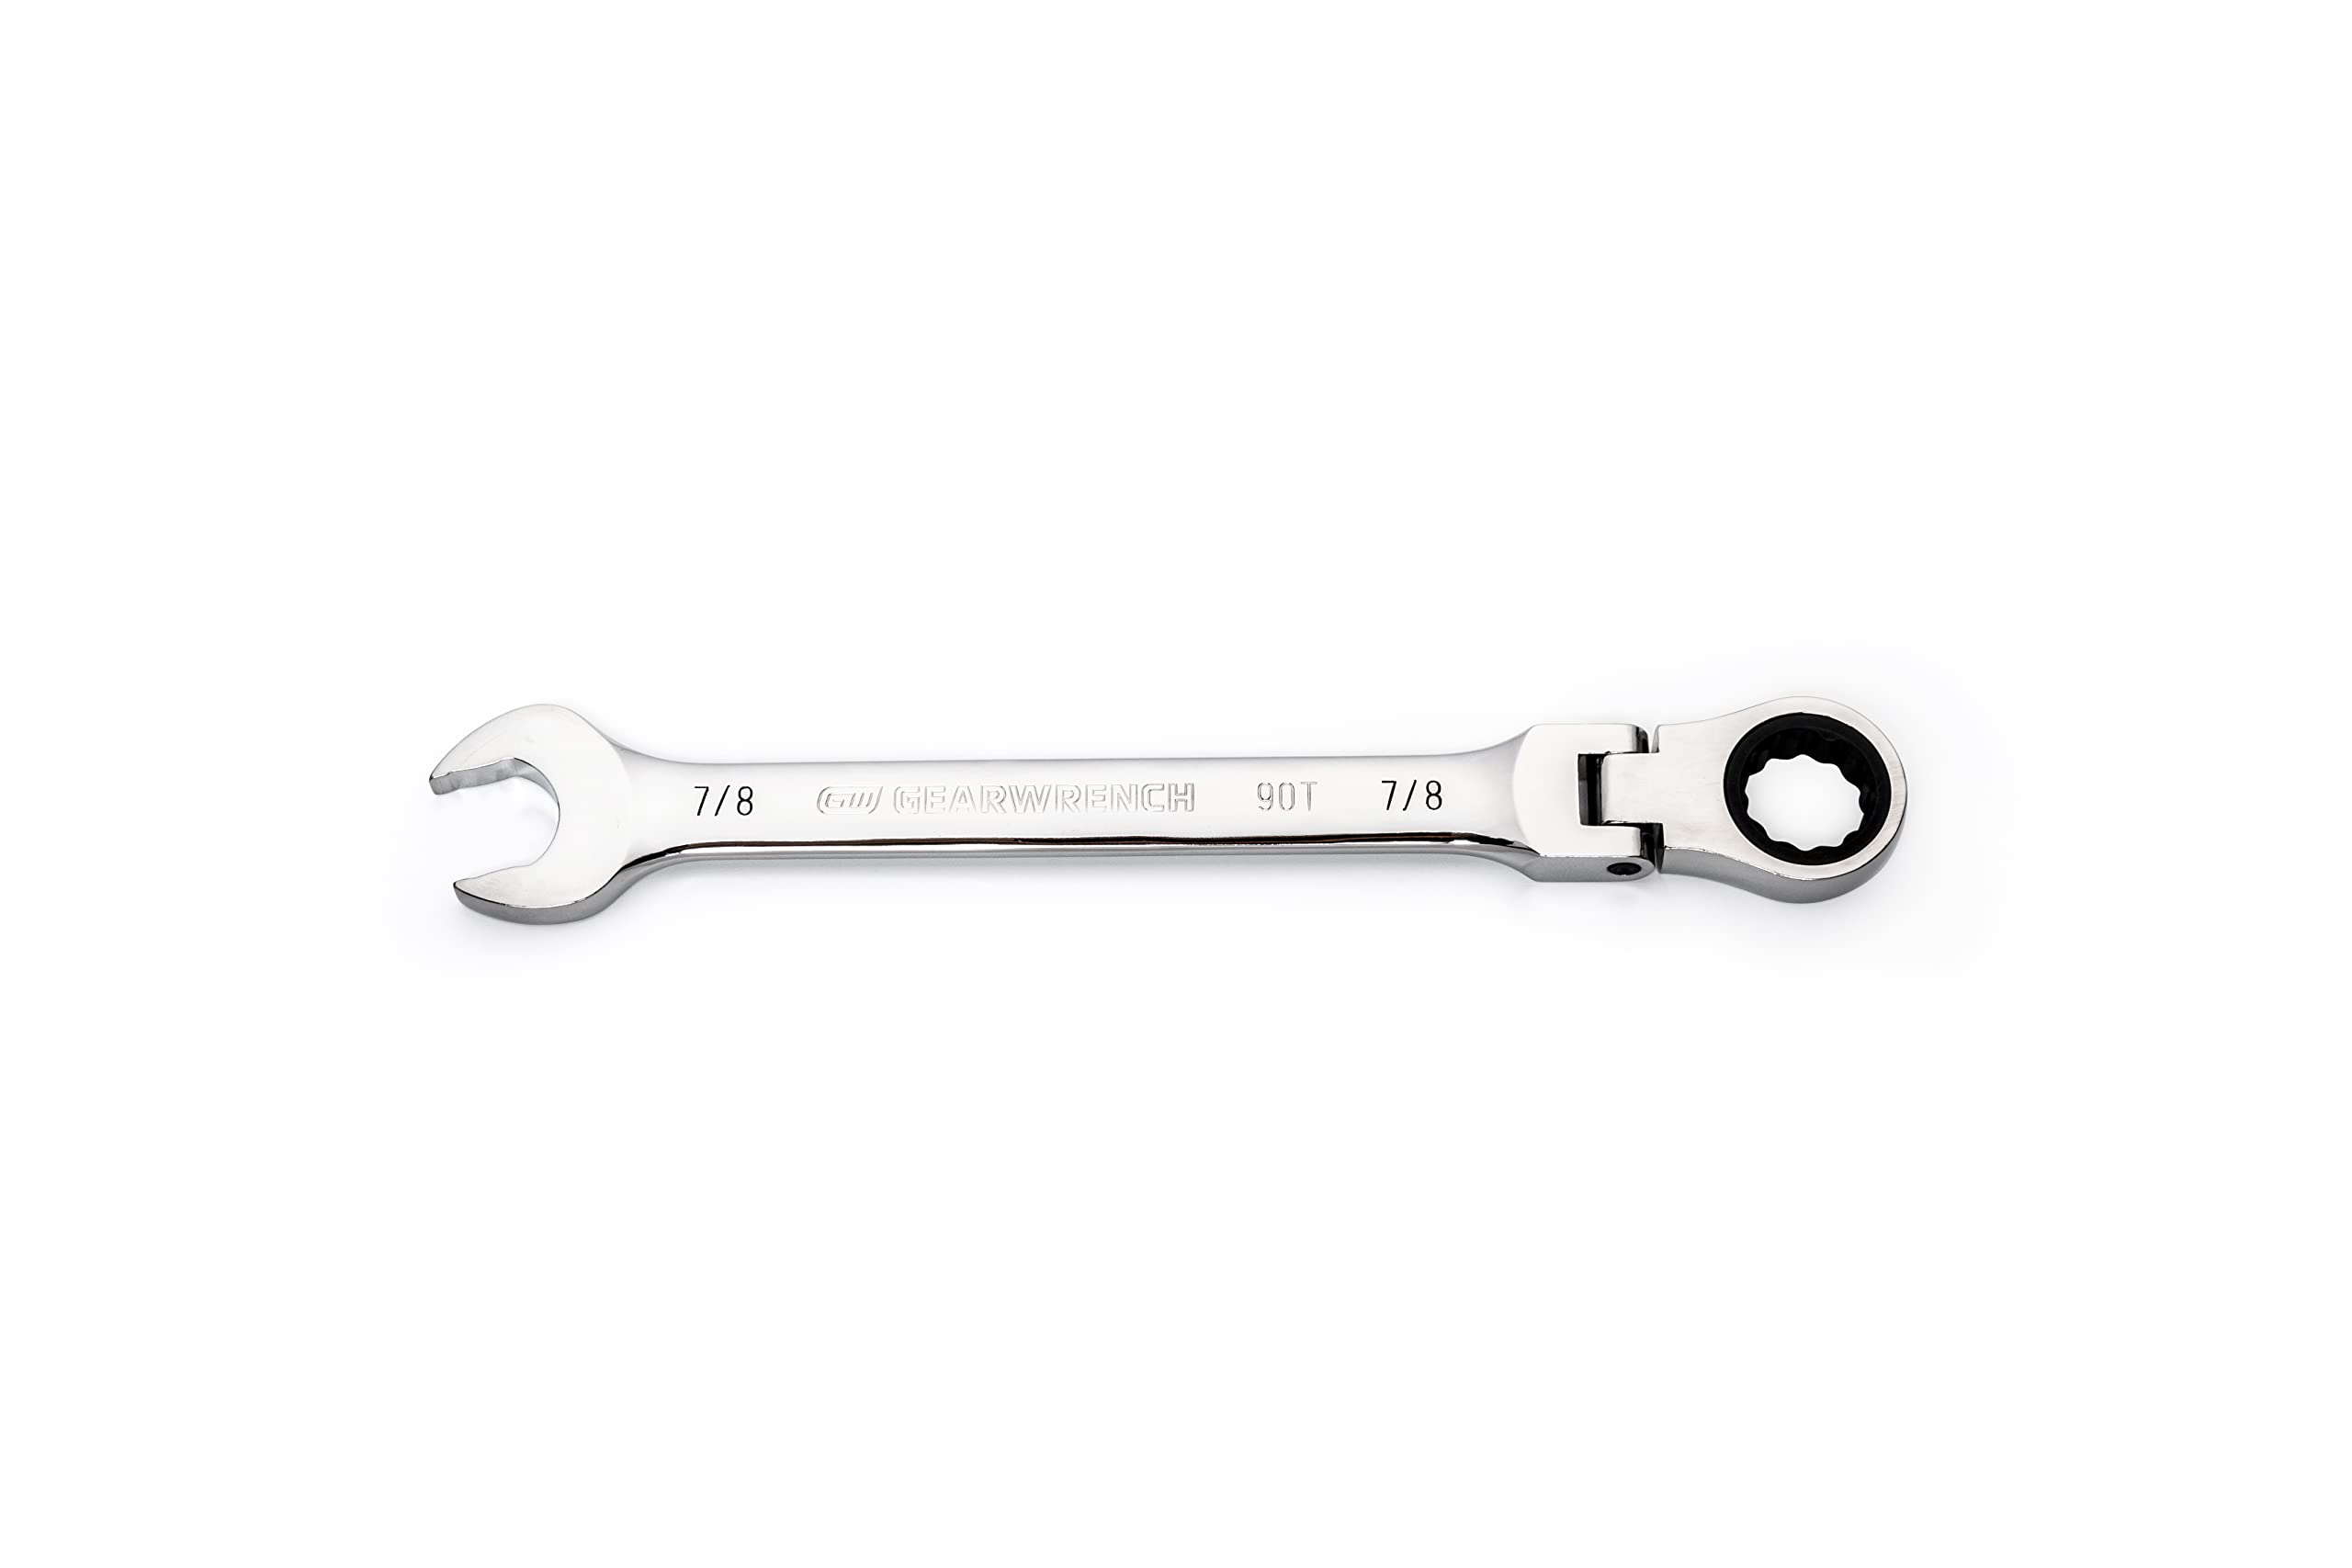 GEARWRENCH 78 4 Degree Swing Arch 12 Point Flex Head Ratcheting Combination Wrench - 86751並行輸入品